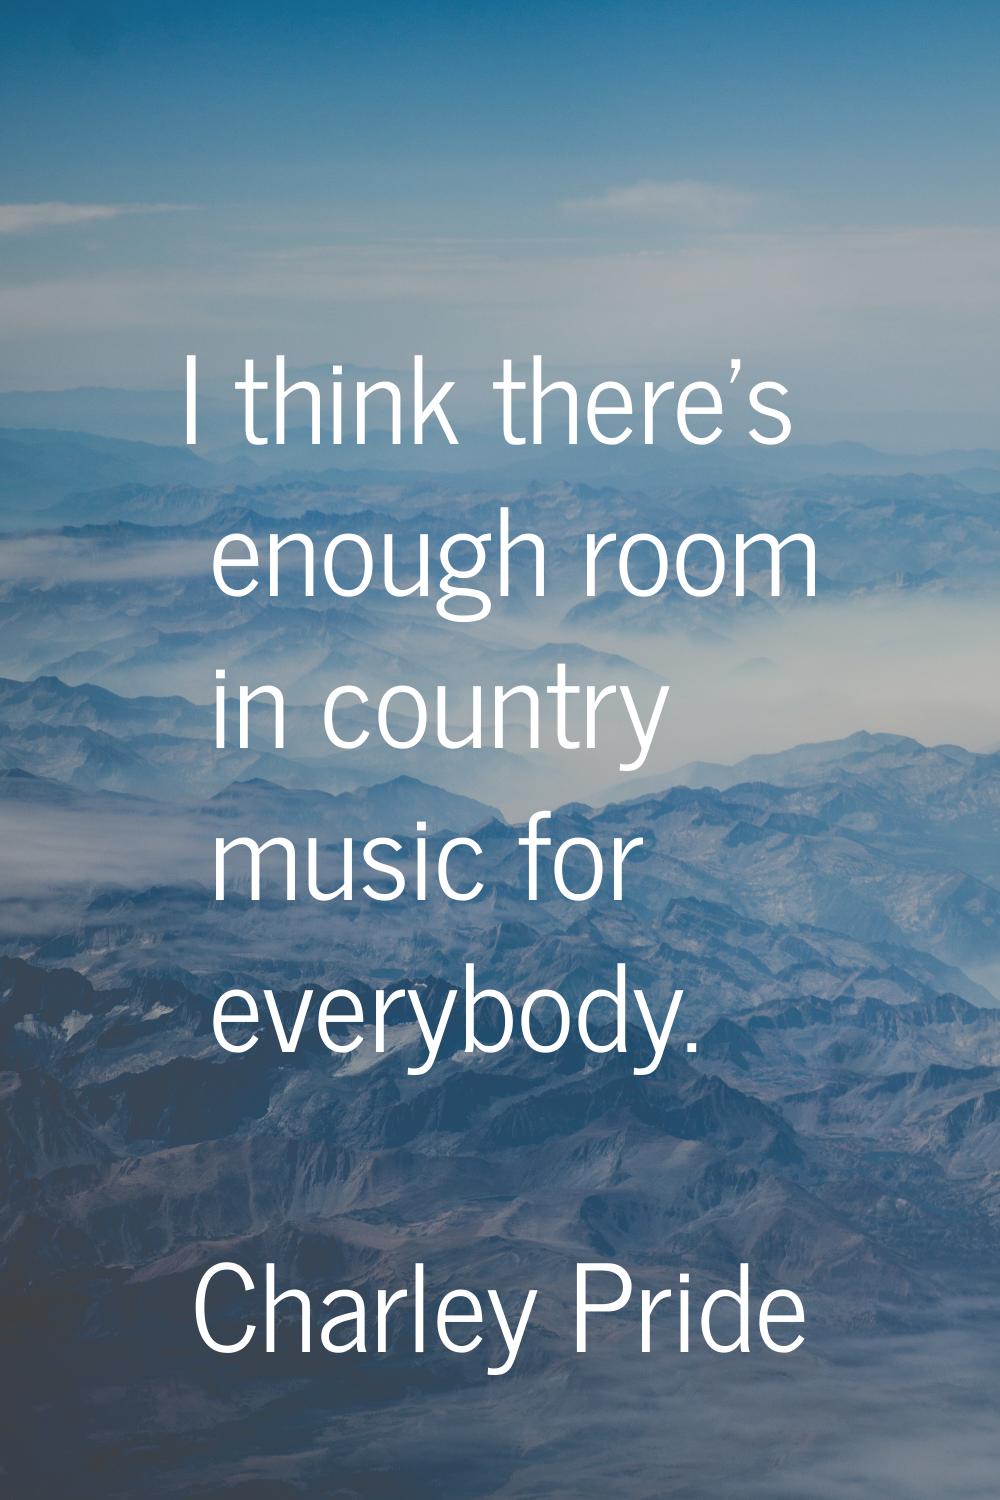 I think there's enough room in country music for everybody.